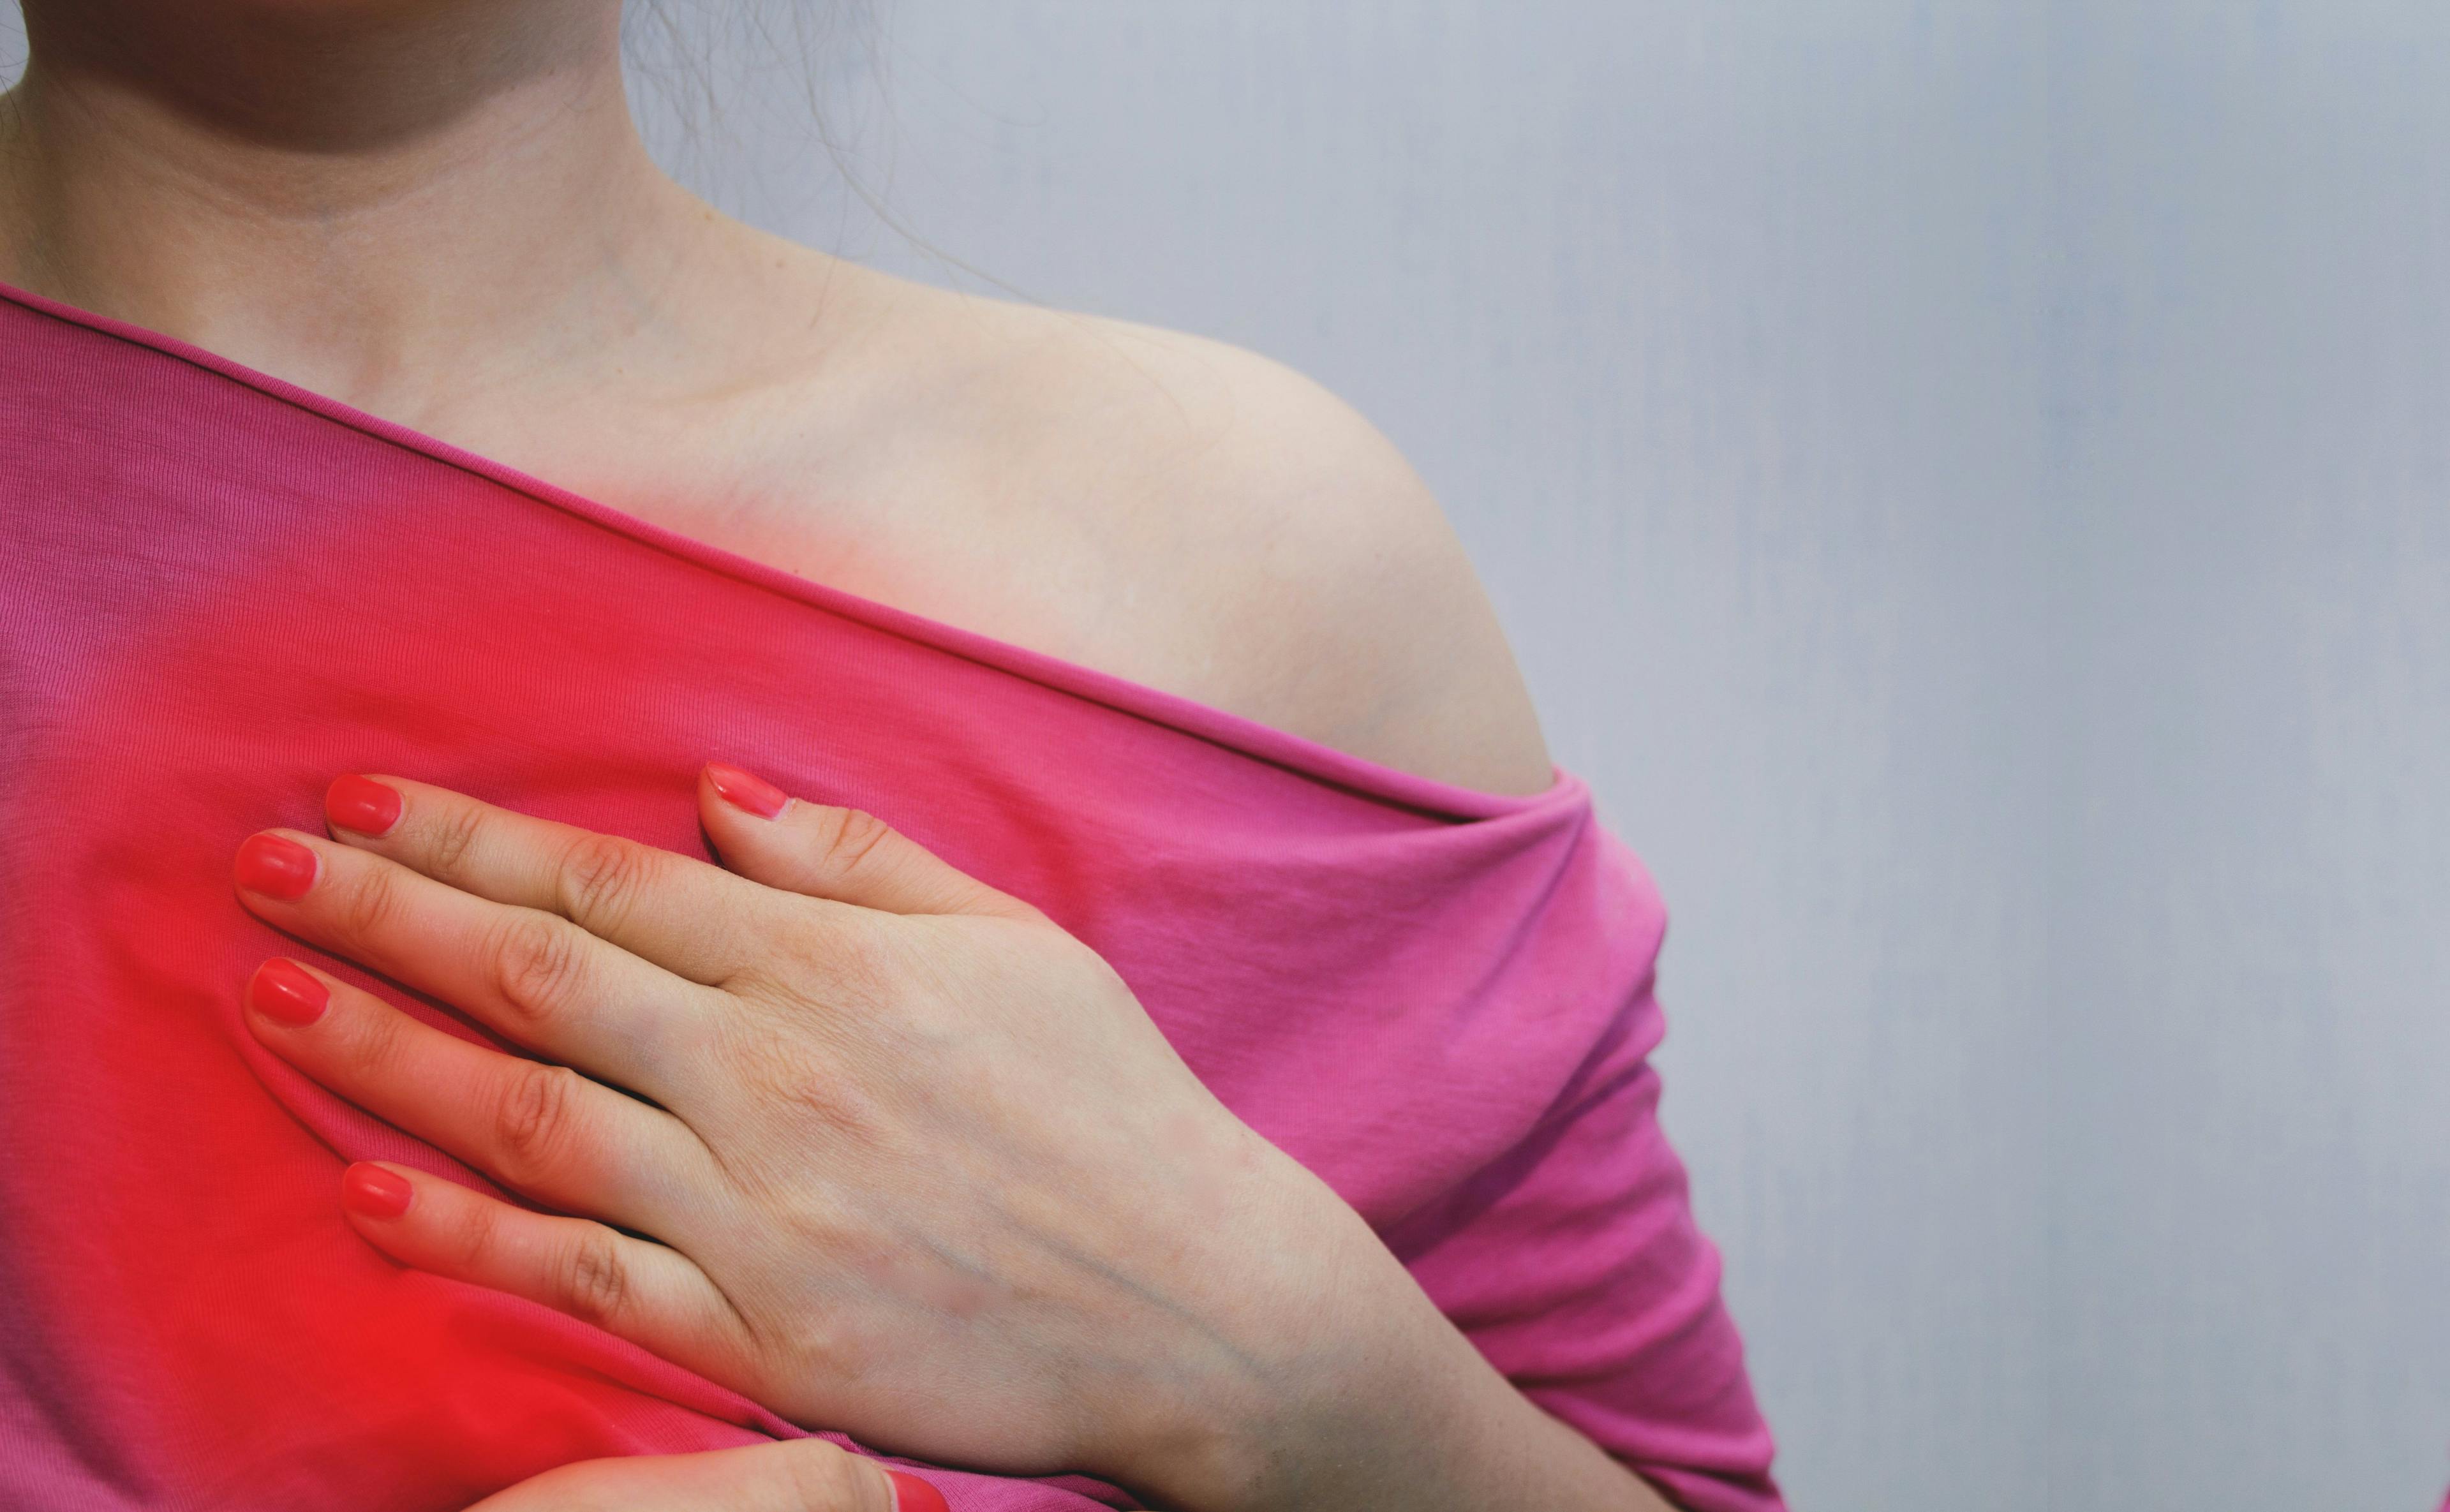 Women with Polycystic Ovary Syndrome at Increased Risk of Cardiovascular Disease Events